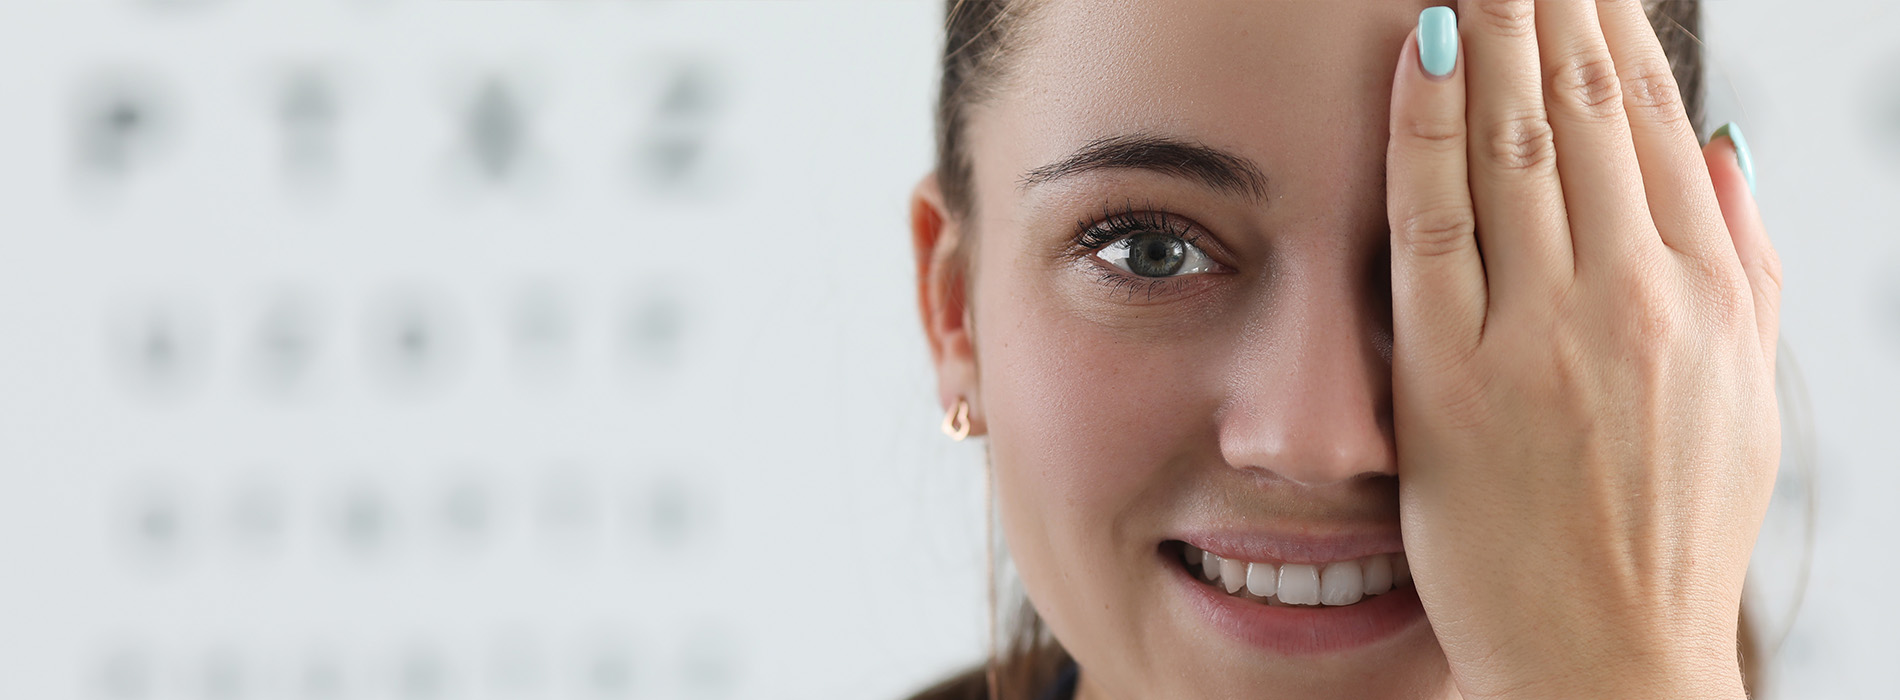 Family Vision Care Associates | Dry Eye Treatment, Contact Lens Exams and Computer Vision